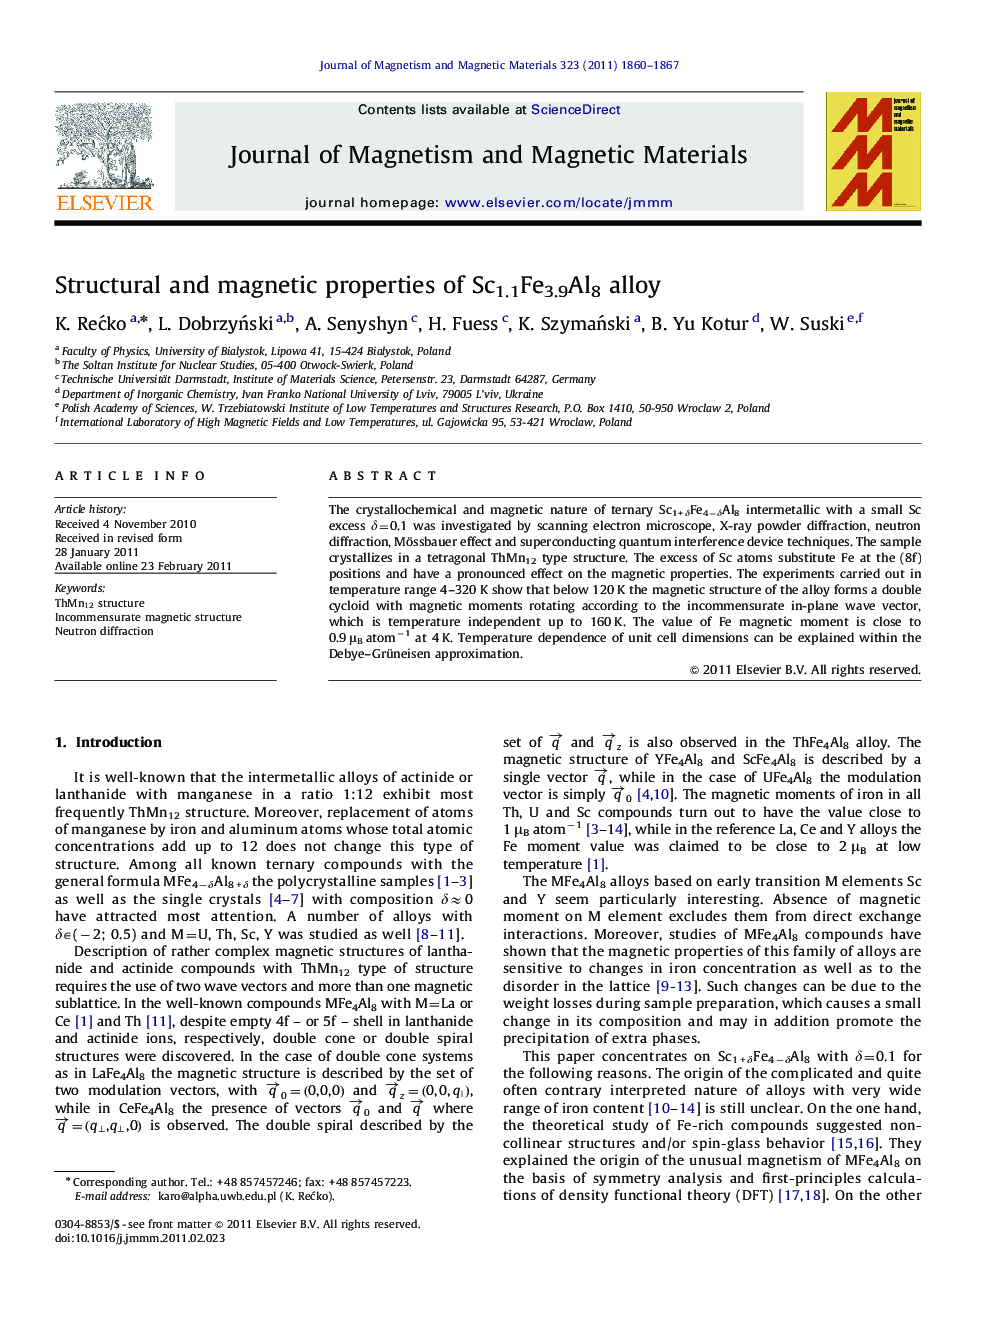 Structural and magnetic properties of Sc1.1Fe3.9Al8 alloy